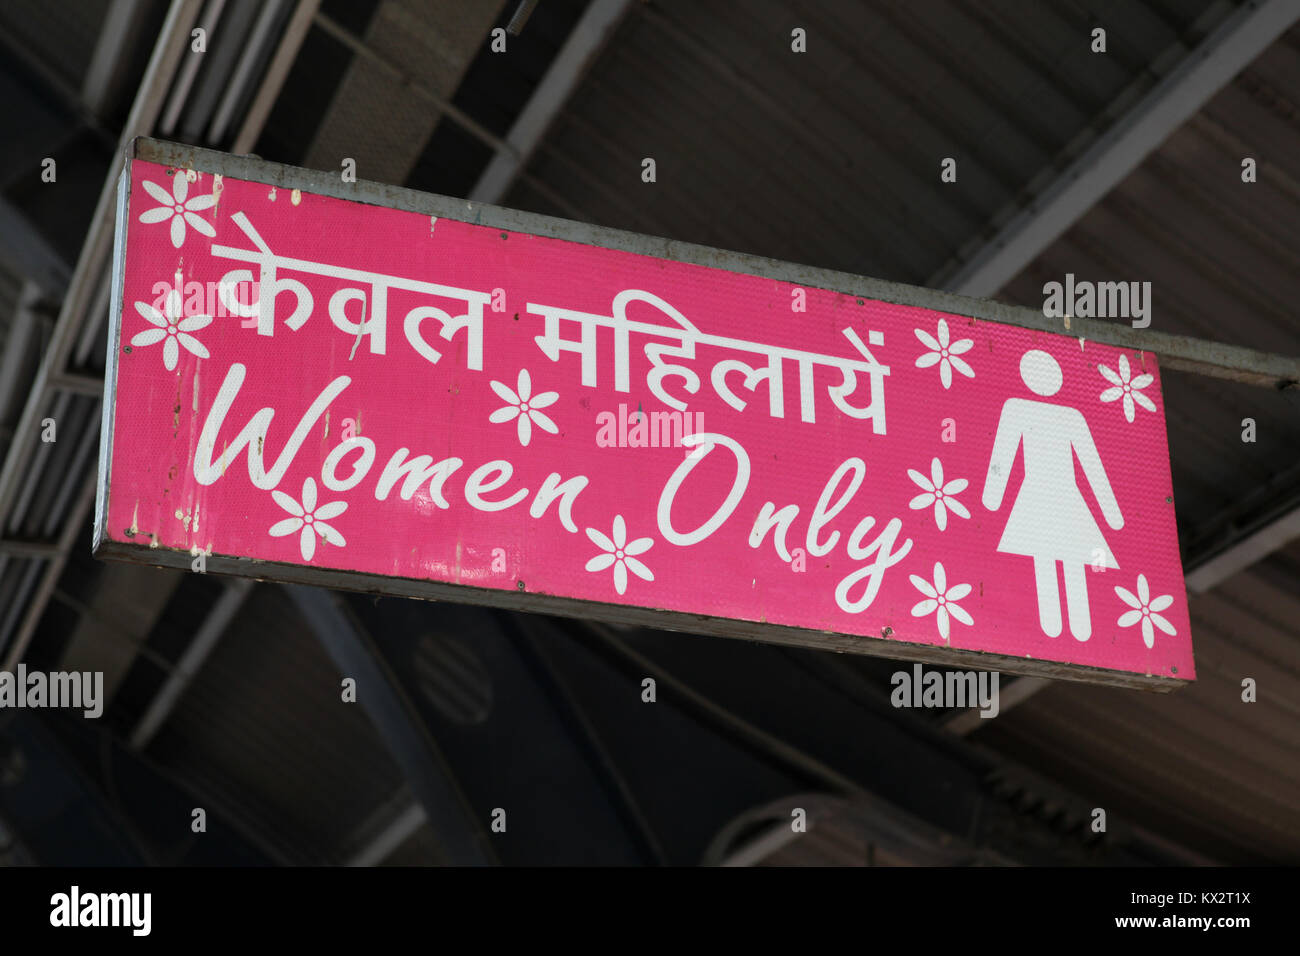 A women only sign (for carriages that are for women) at a metro station in New Delhi, India Stock Photo